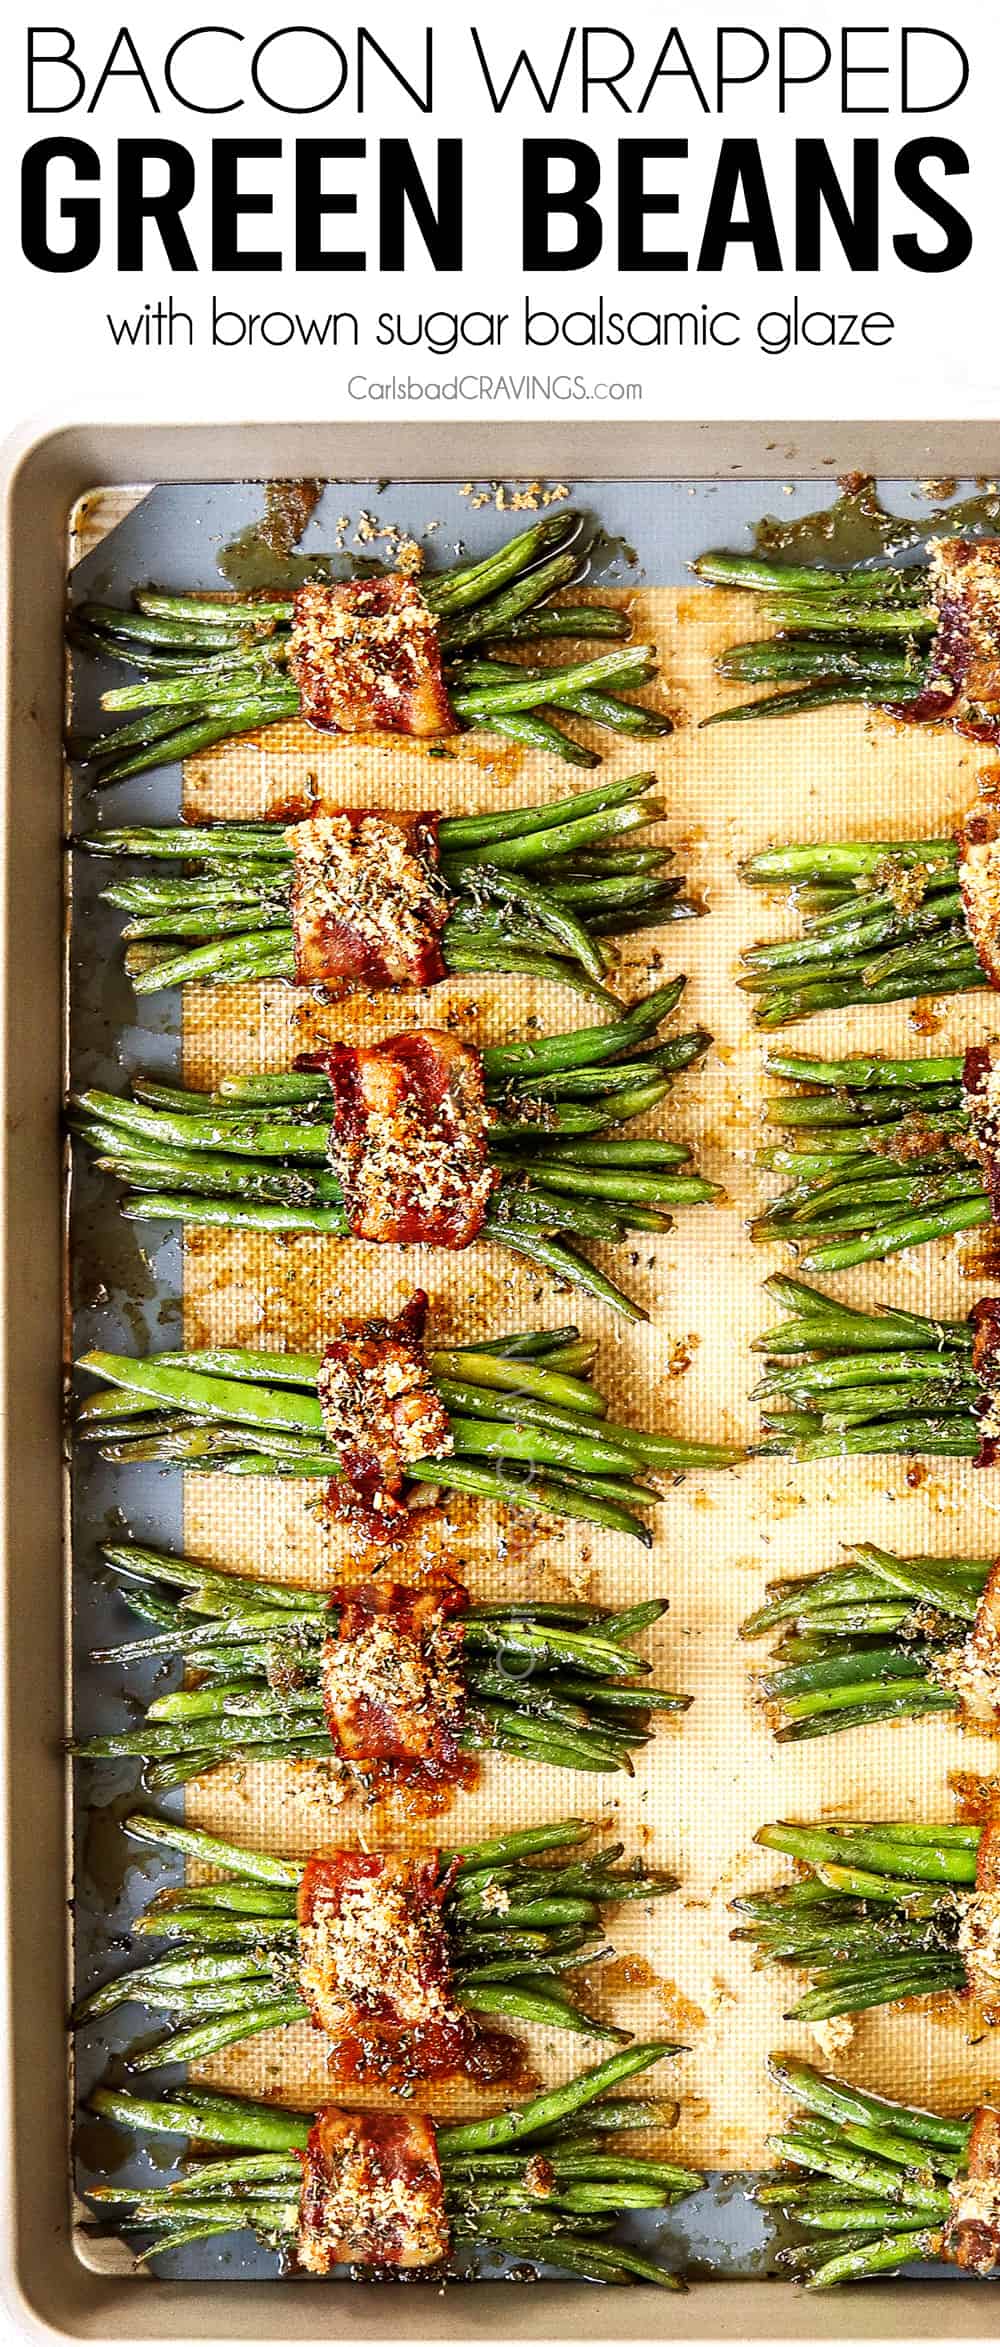 top view of bacon wrapped green beans on a baking sheet